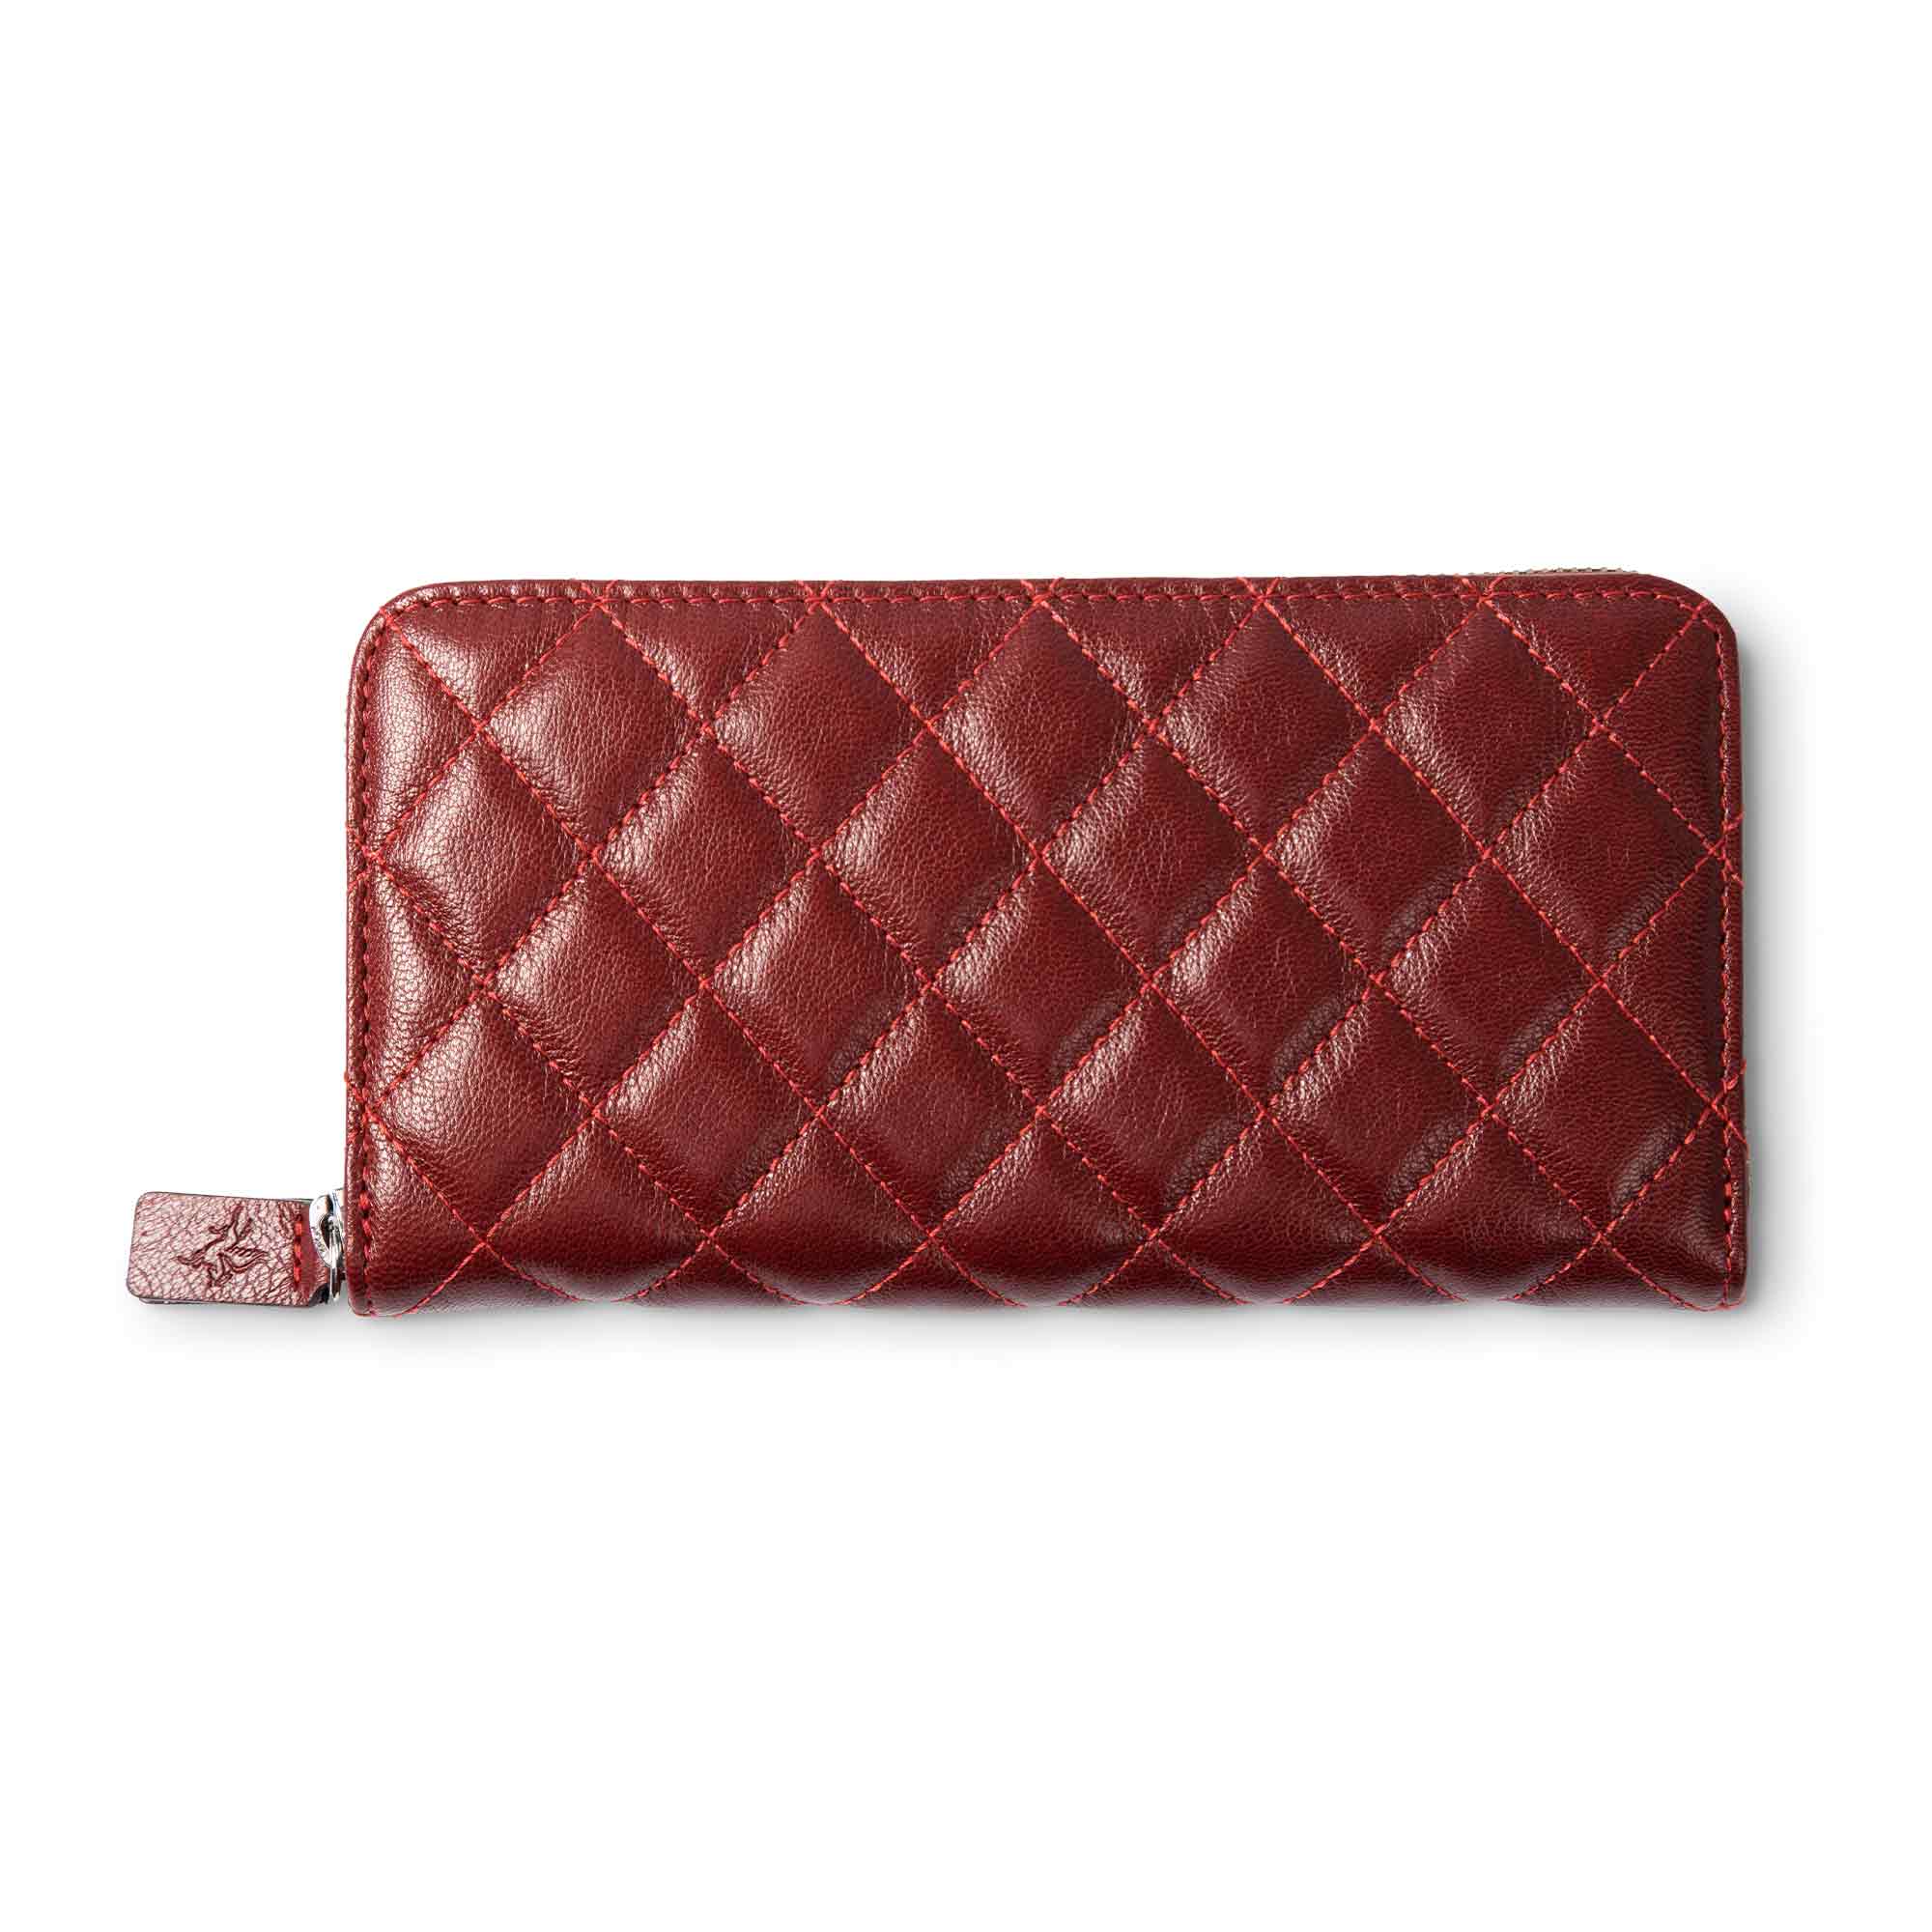 Red Genuine Leather Soft and Slim Wallet/Purse by ENAAF – Woodland Canada